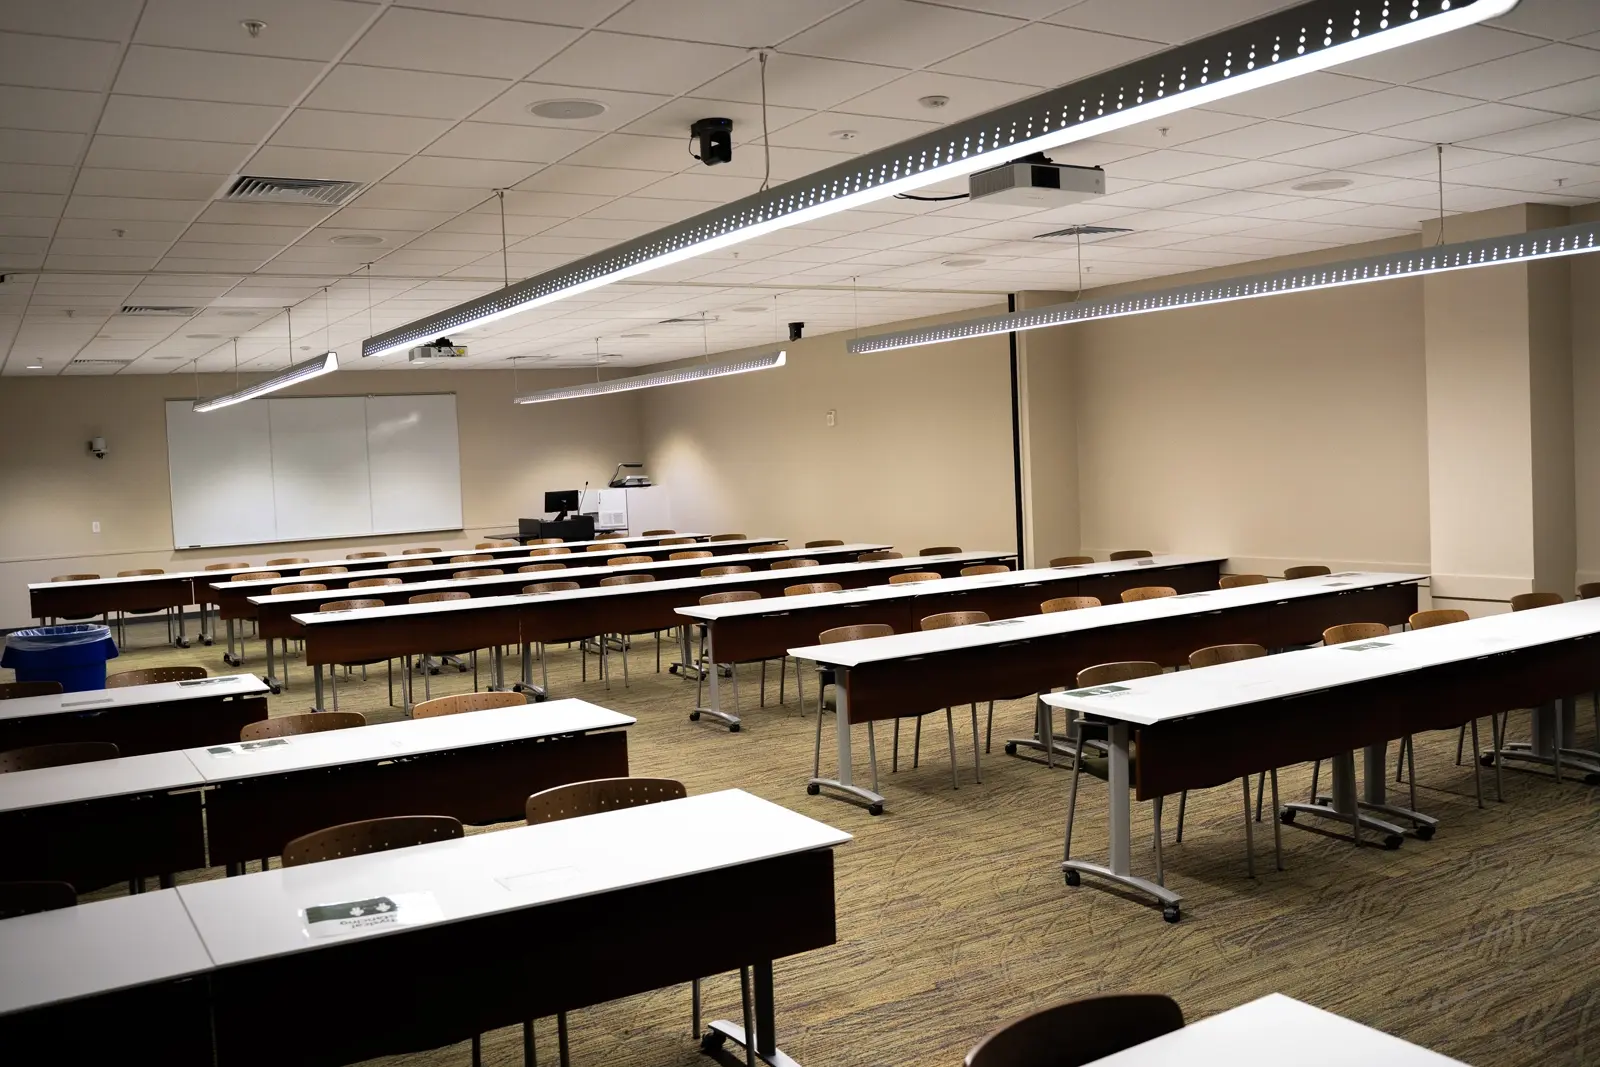 CAMLS An empty classroom with rows of long desks and chairs facing a whiteboard and a podium. The ceiling has strip lighting, and a projector is mounted at the front. The walls and carpet are beige, creating a neutral tone throughout the space.